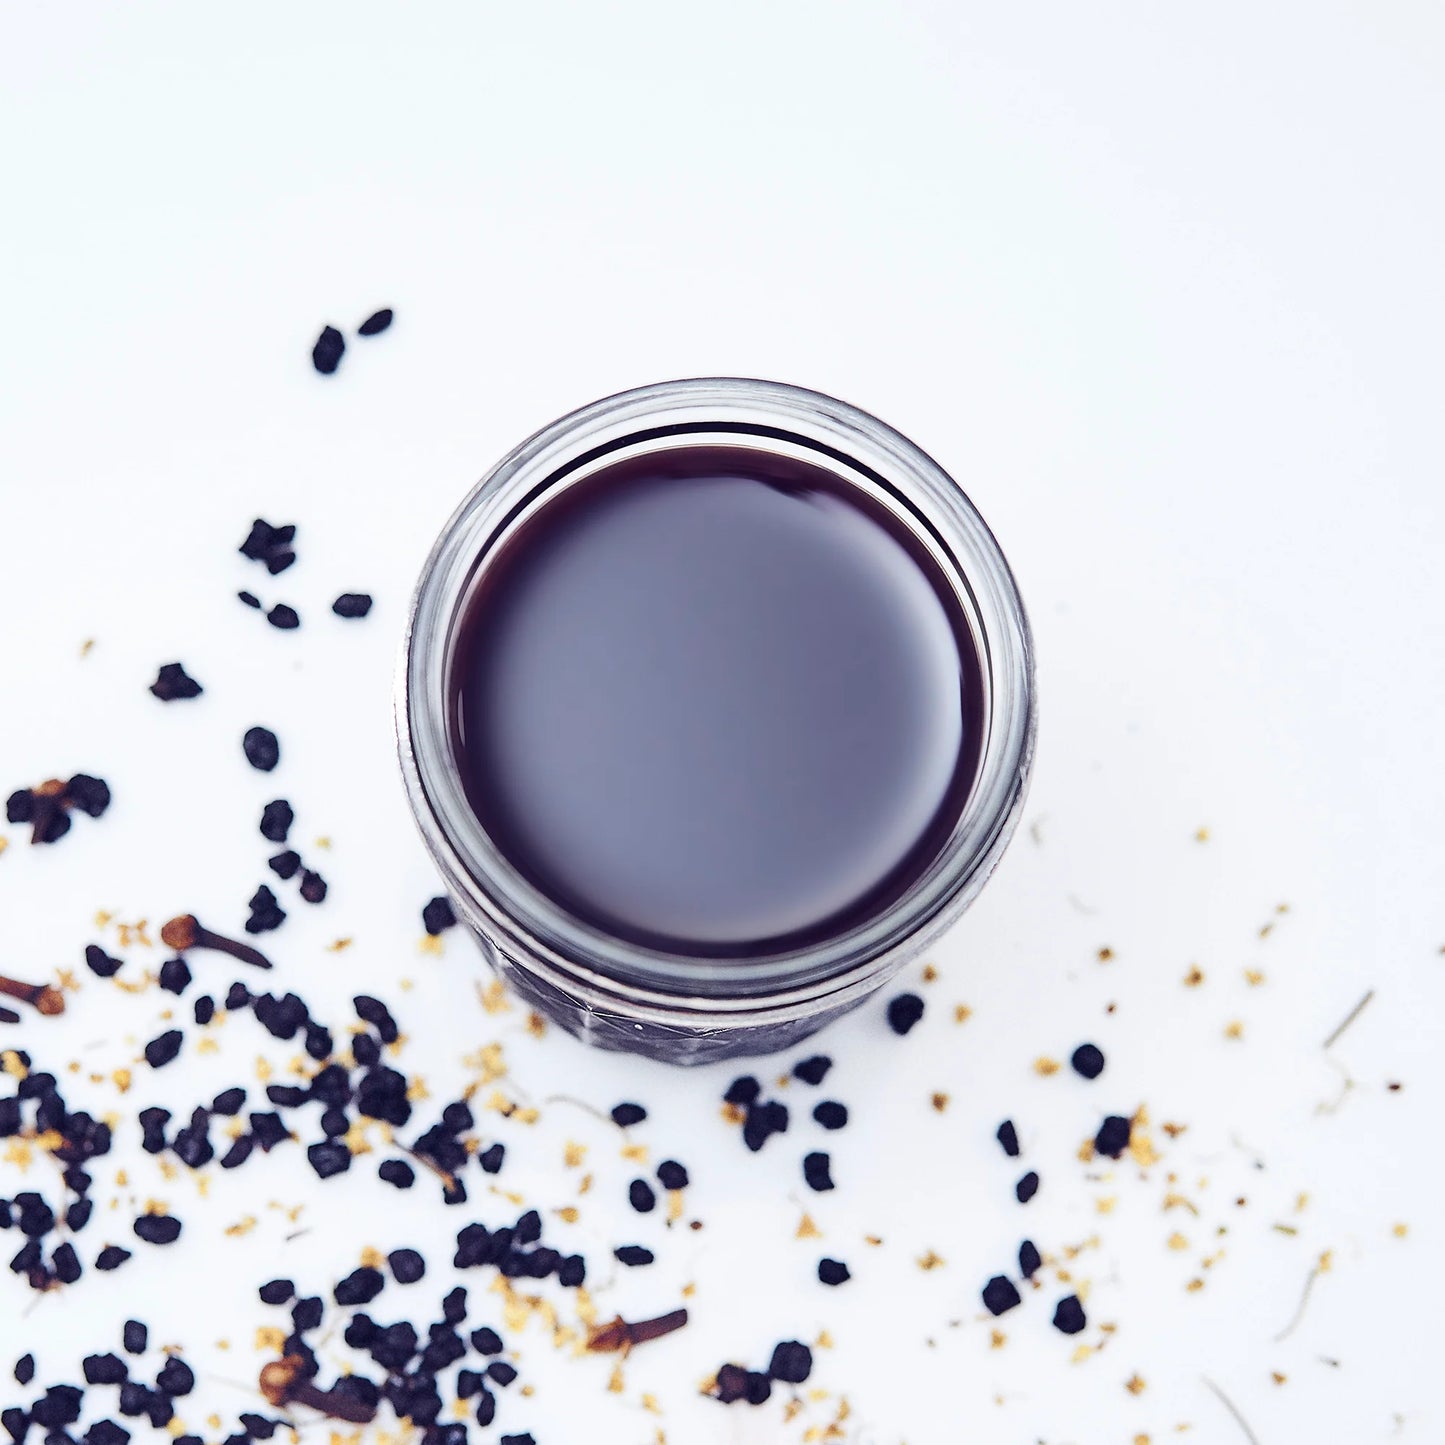 Benefits of Drinking Elderberry Syrup